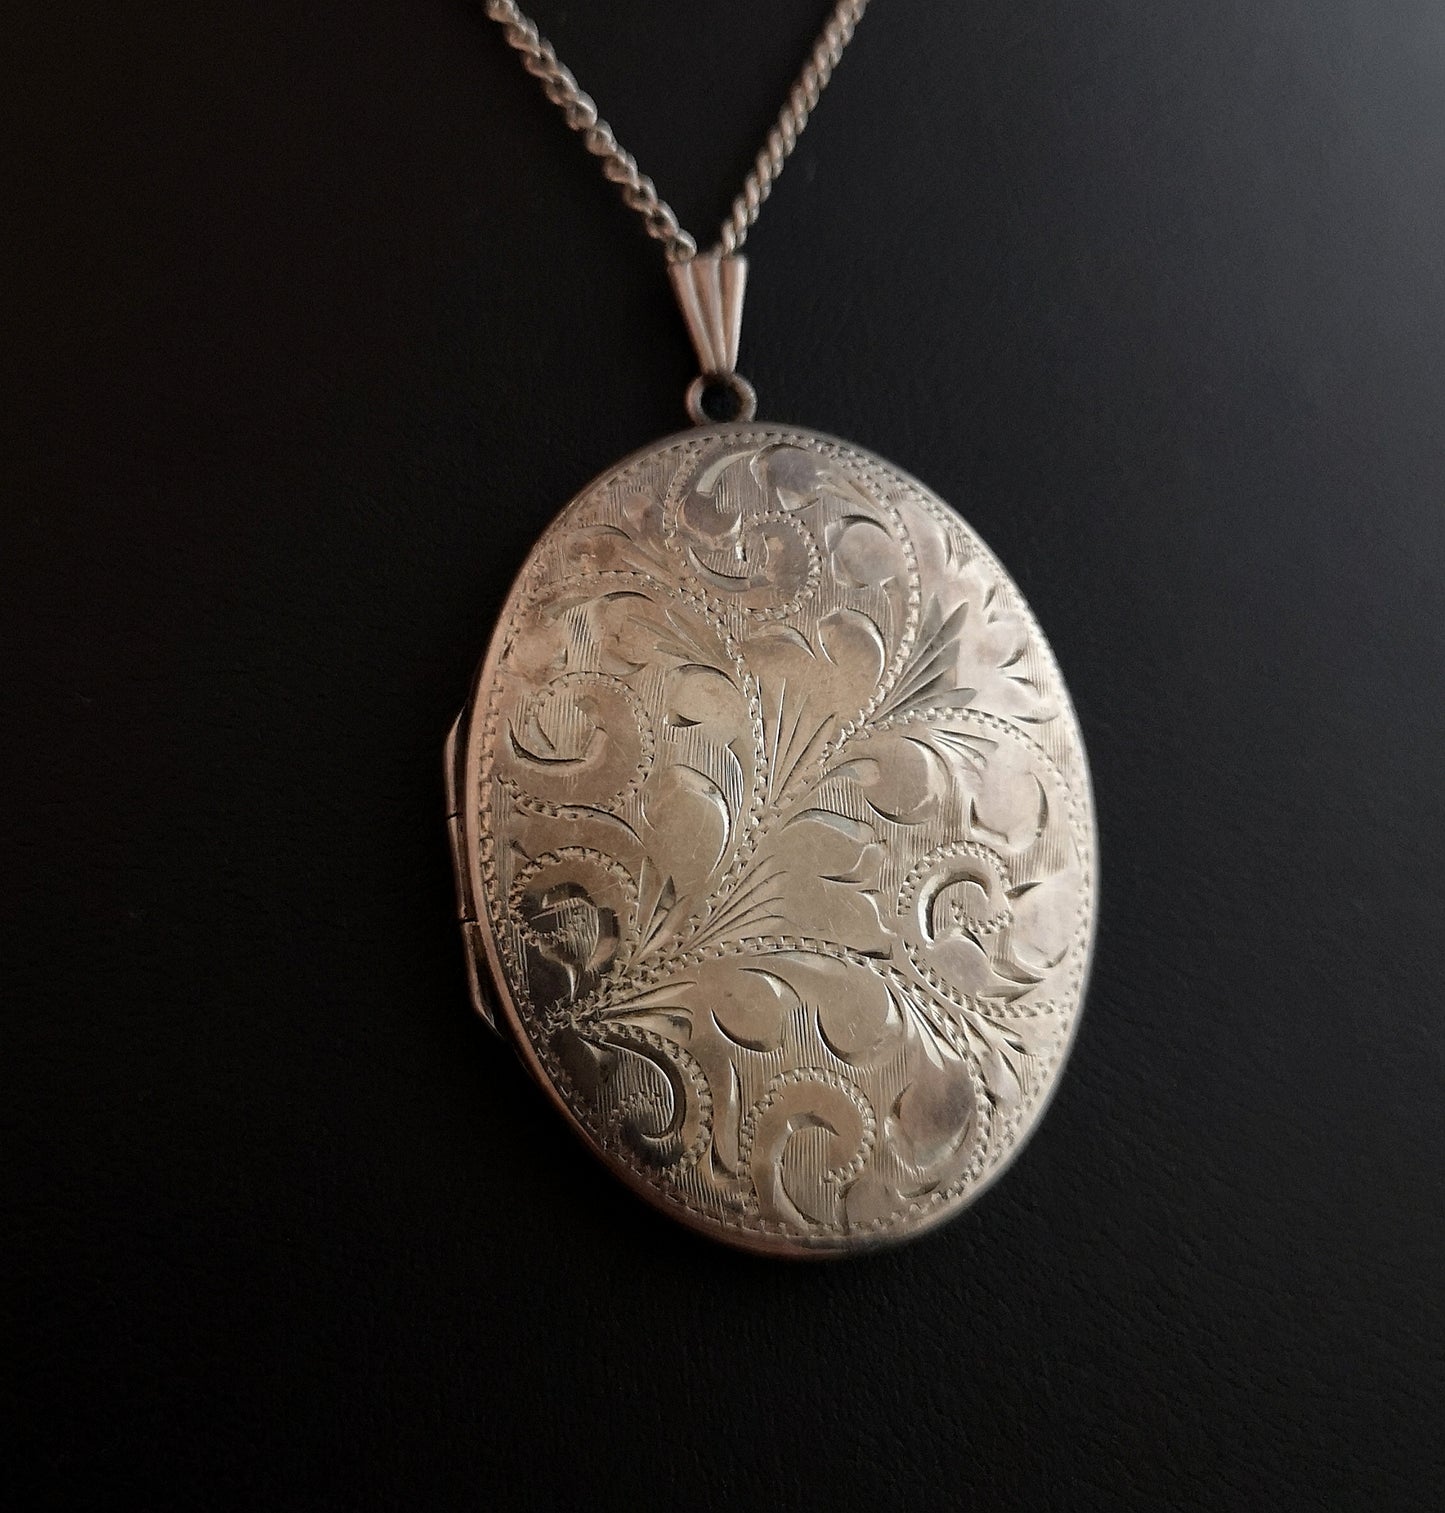 Vintage silver locket and chain, 1970s, necklace